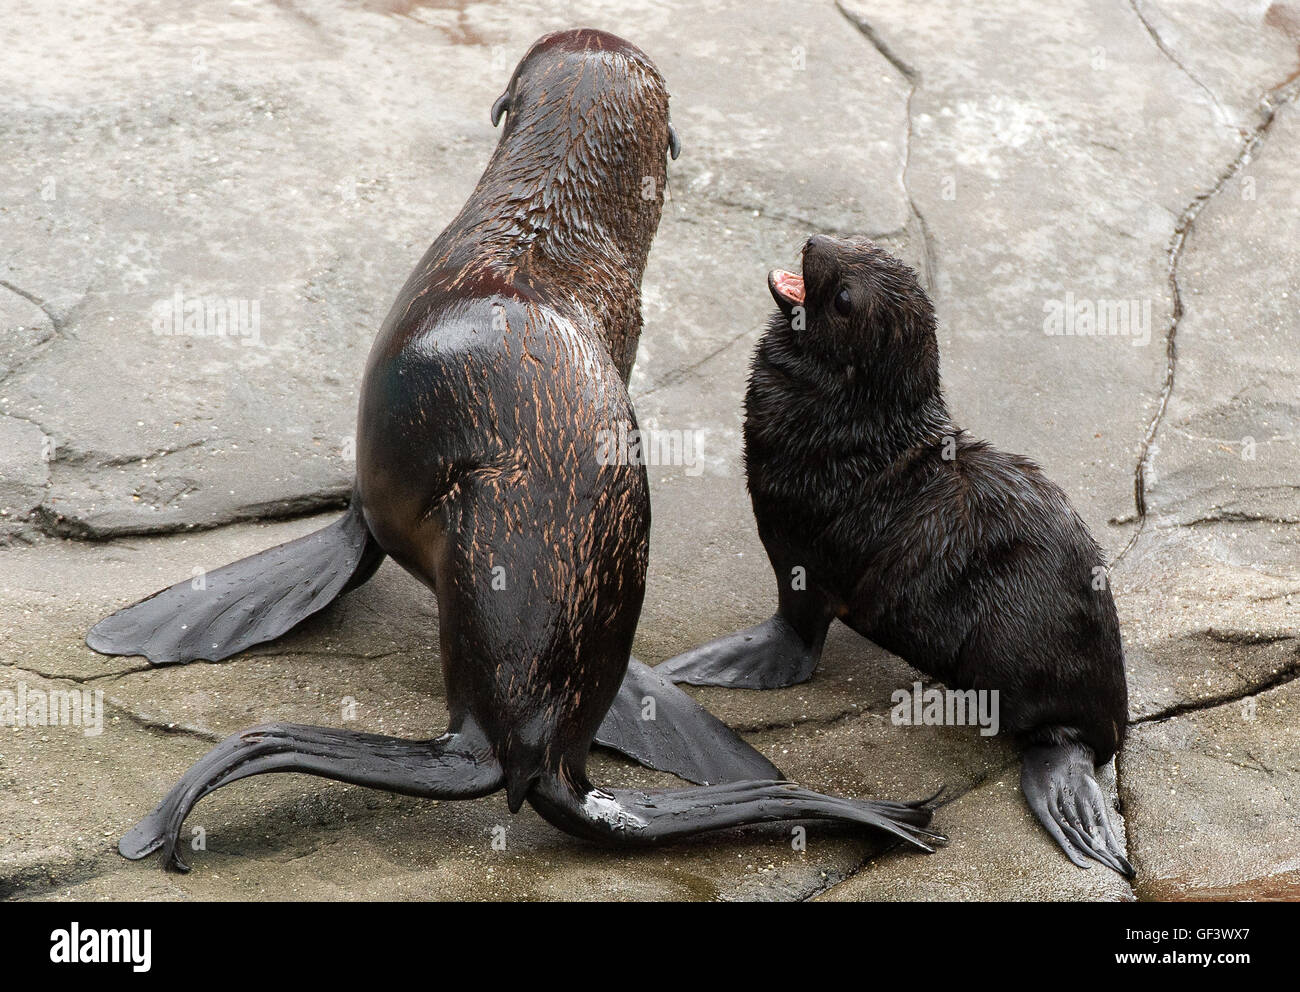 Hanover, Germany. 28th July, 2016. The young sea bear girl Myrte and her mother Diva can be seen at the zoo in Hanover, Germany, 28 July 2016. Myrte was born on 24 June 2016 and is a northern fur seal (Callorhinus ursinus). PHOTO: SEBASTIAN GOLLNOW/dpa/Alamy Live News Stock Photo